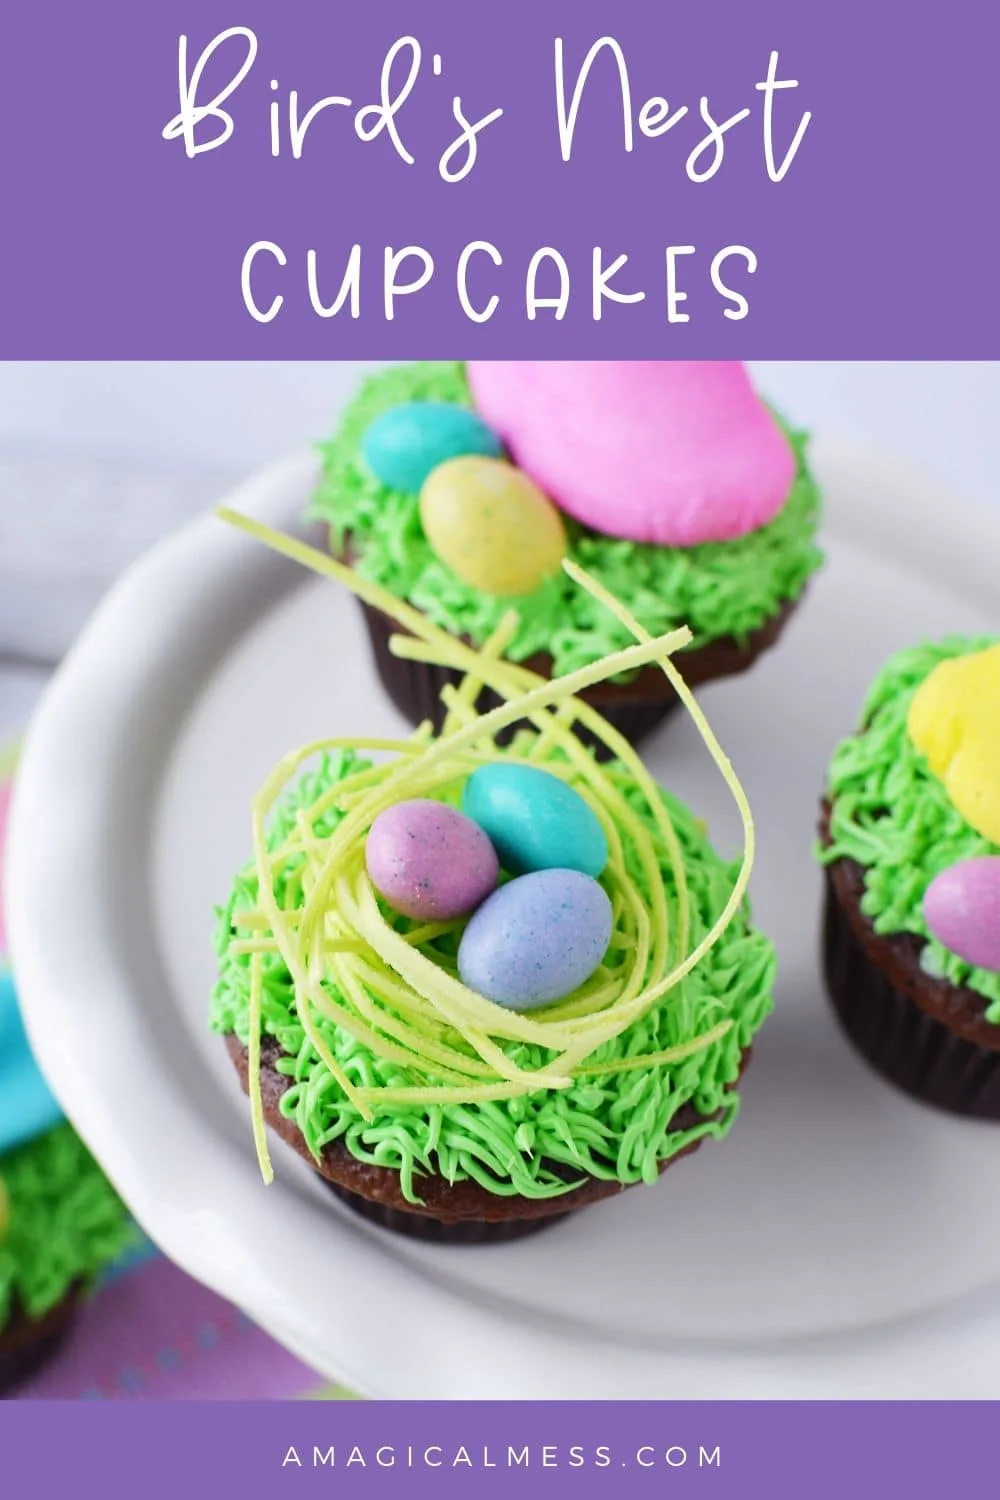 Cupcakes with Easter eggs on top